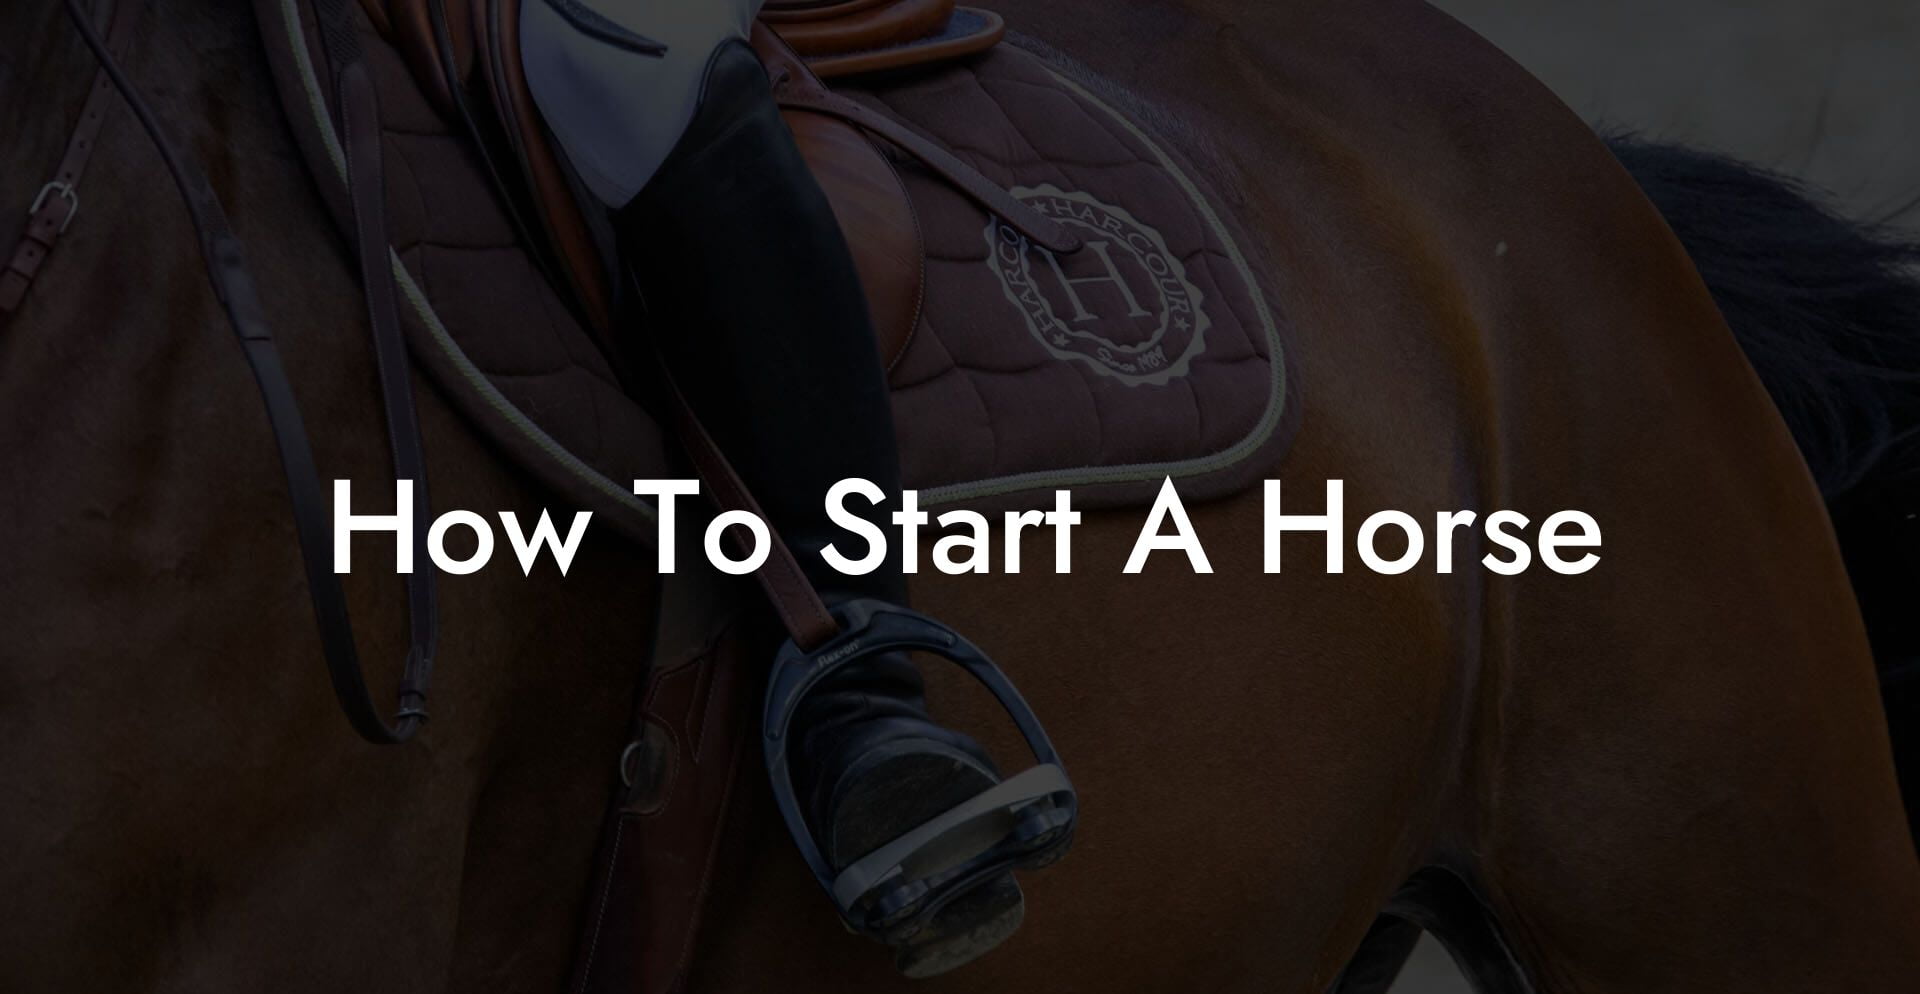 How To Start A Horse